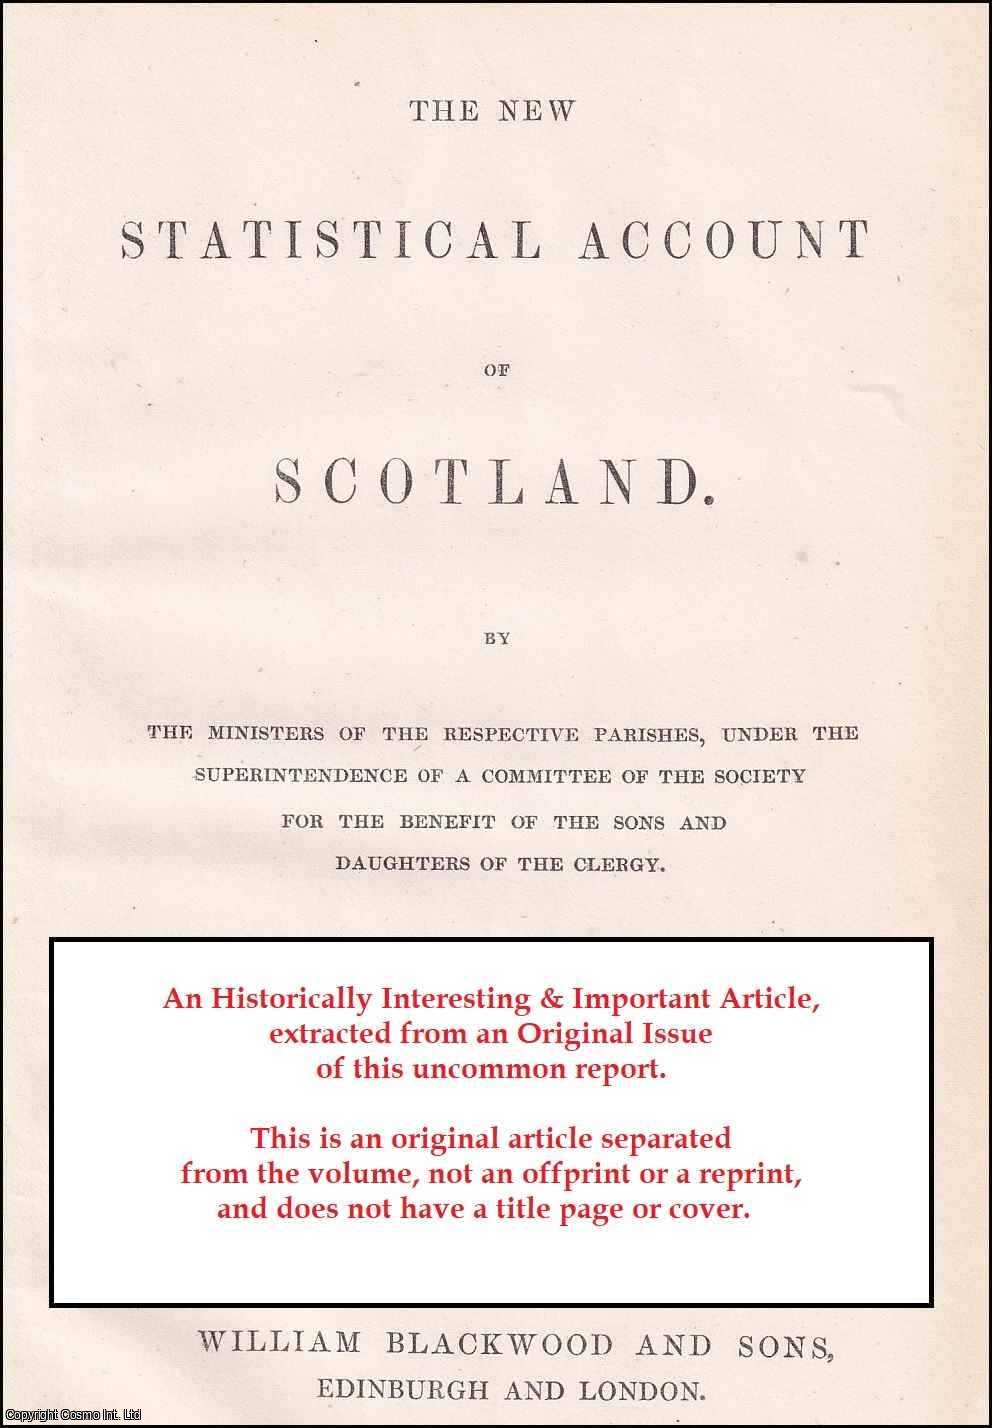 Rev. Finlay Cook - Parish of Reay. Presbytery of Caithness, Synod of Sutherland and Caithness. An uncommon original article from The New Statistical Account of Scotland, 1845.